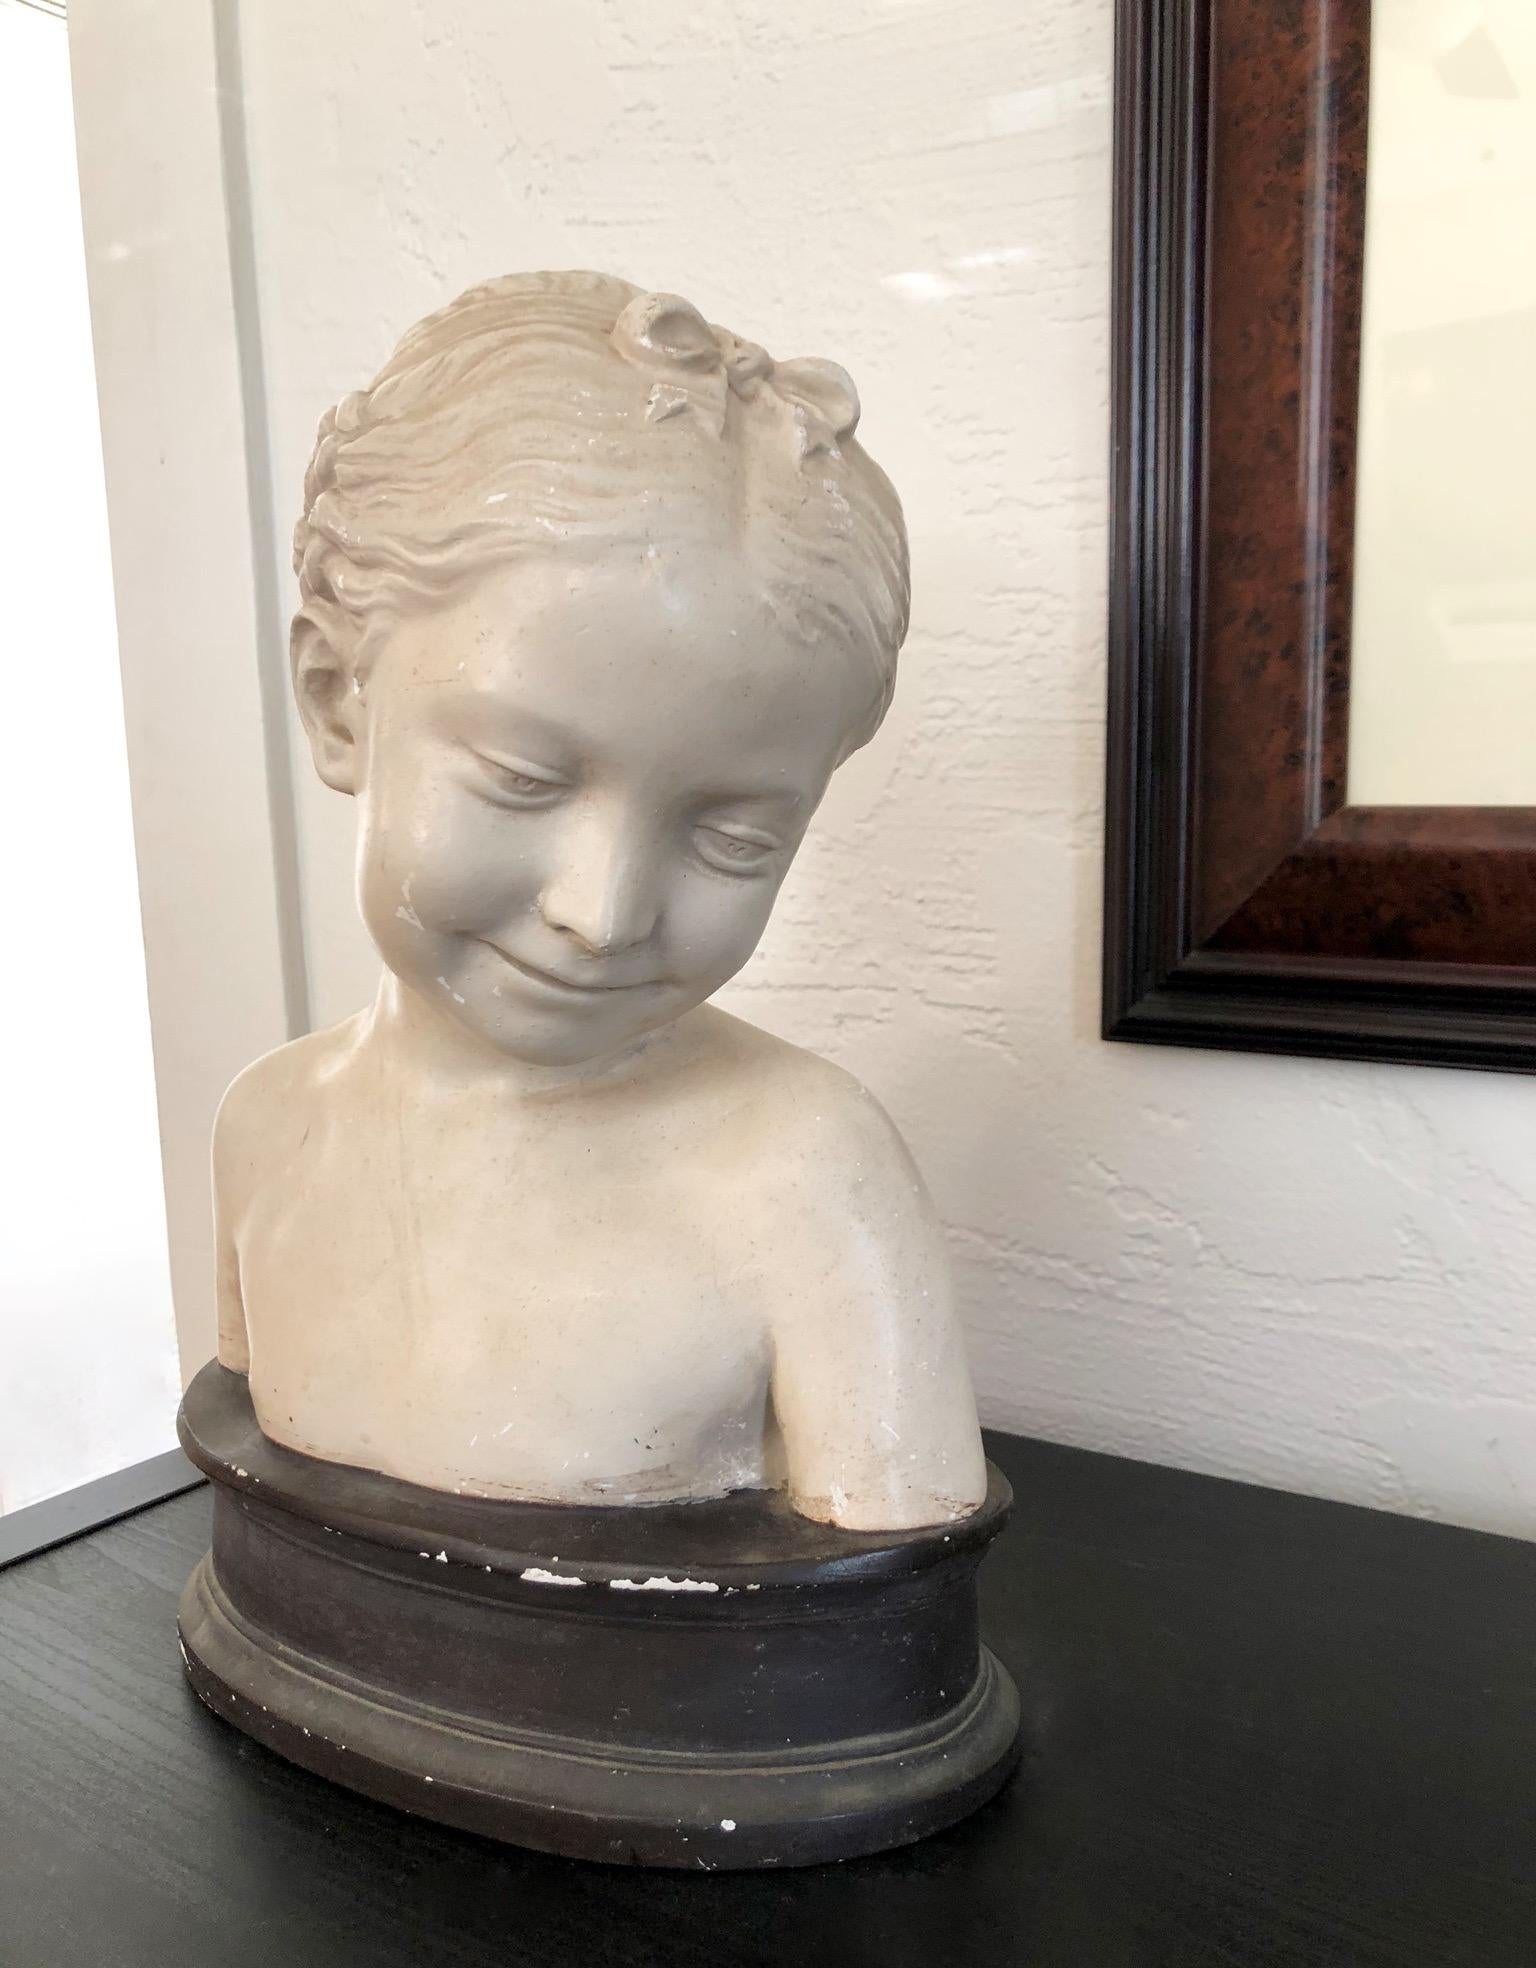 Gorgeous vintage bust of a young girl with braided hair. Age is 1920s-1940s. The bust is clay and the base is a composite wood. All signs of age and wear shown in photos. The girl is a beautiful creamy white. This piece would work perfectly as a